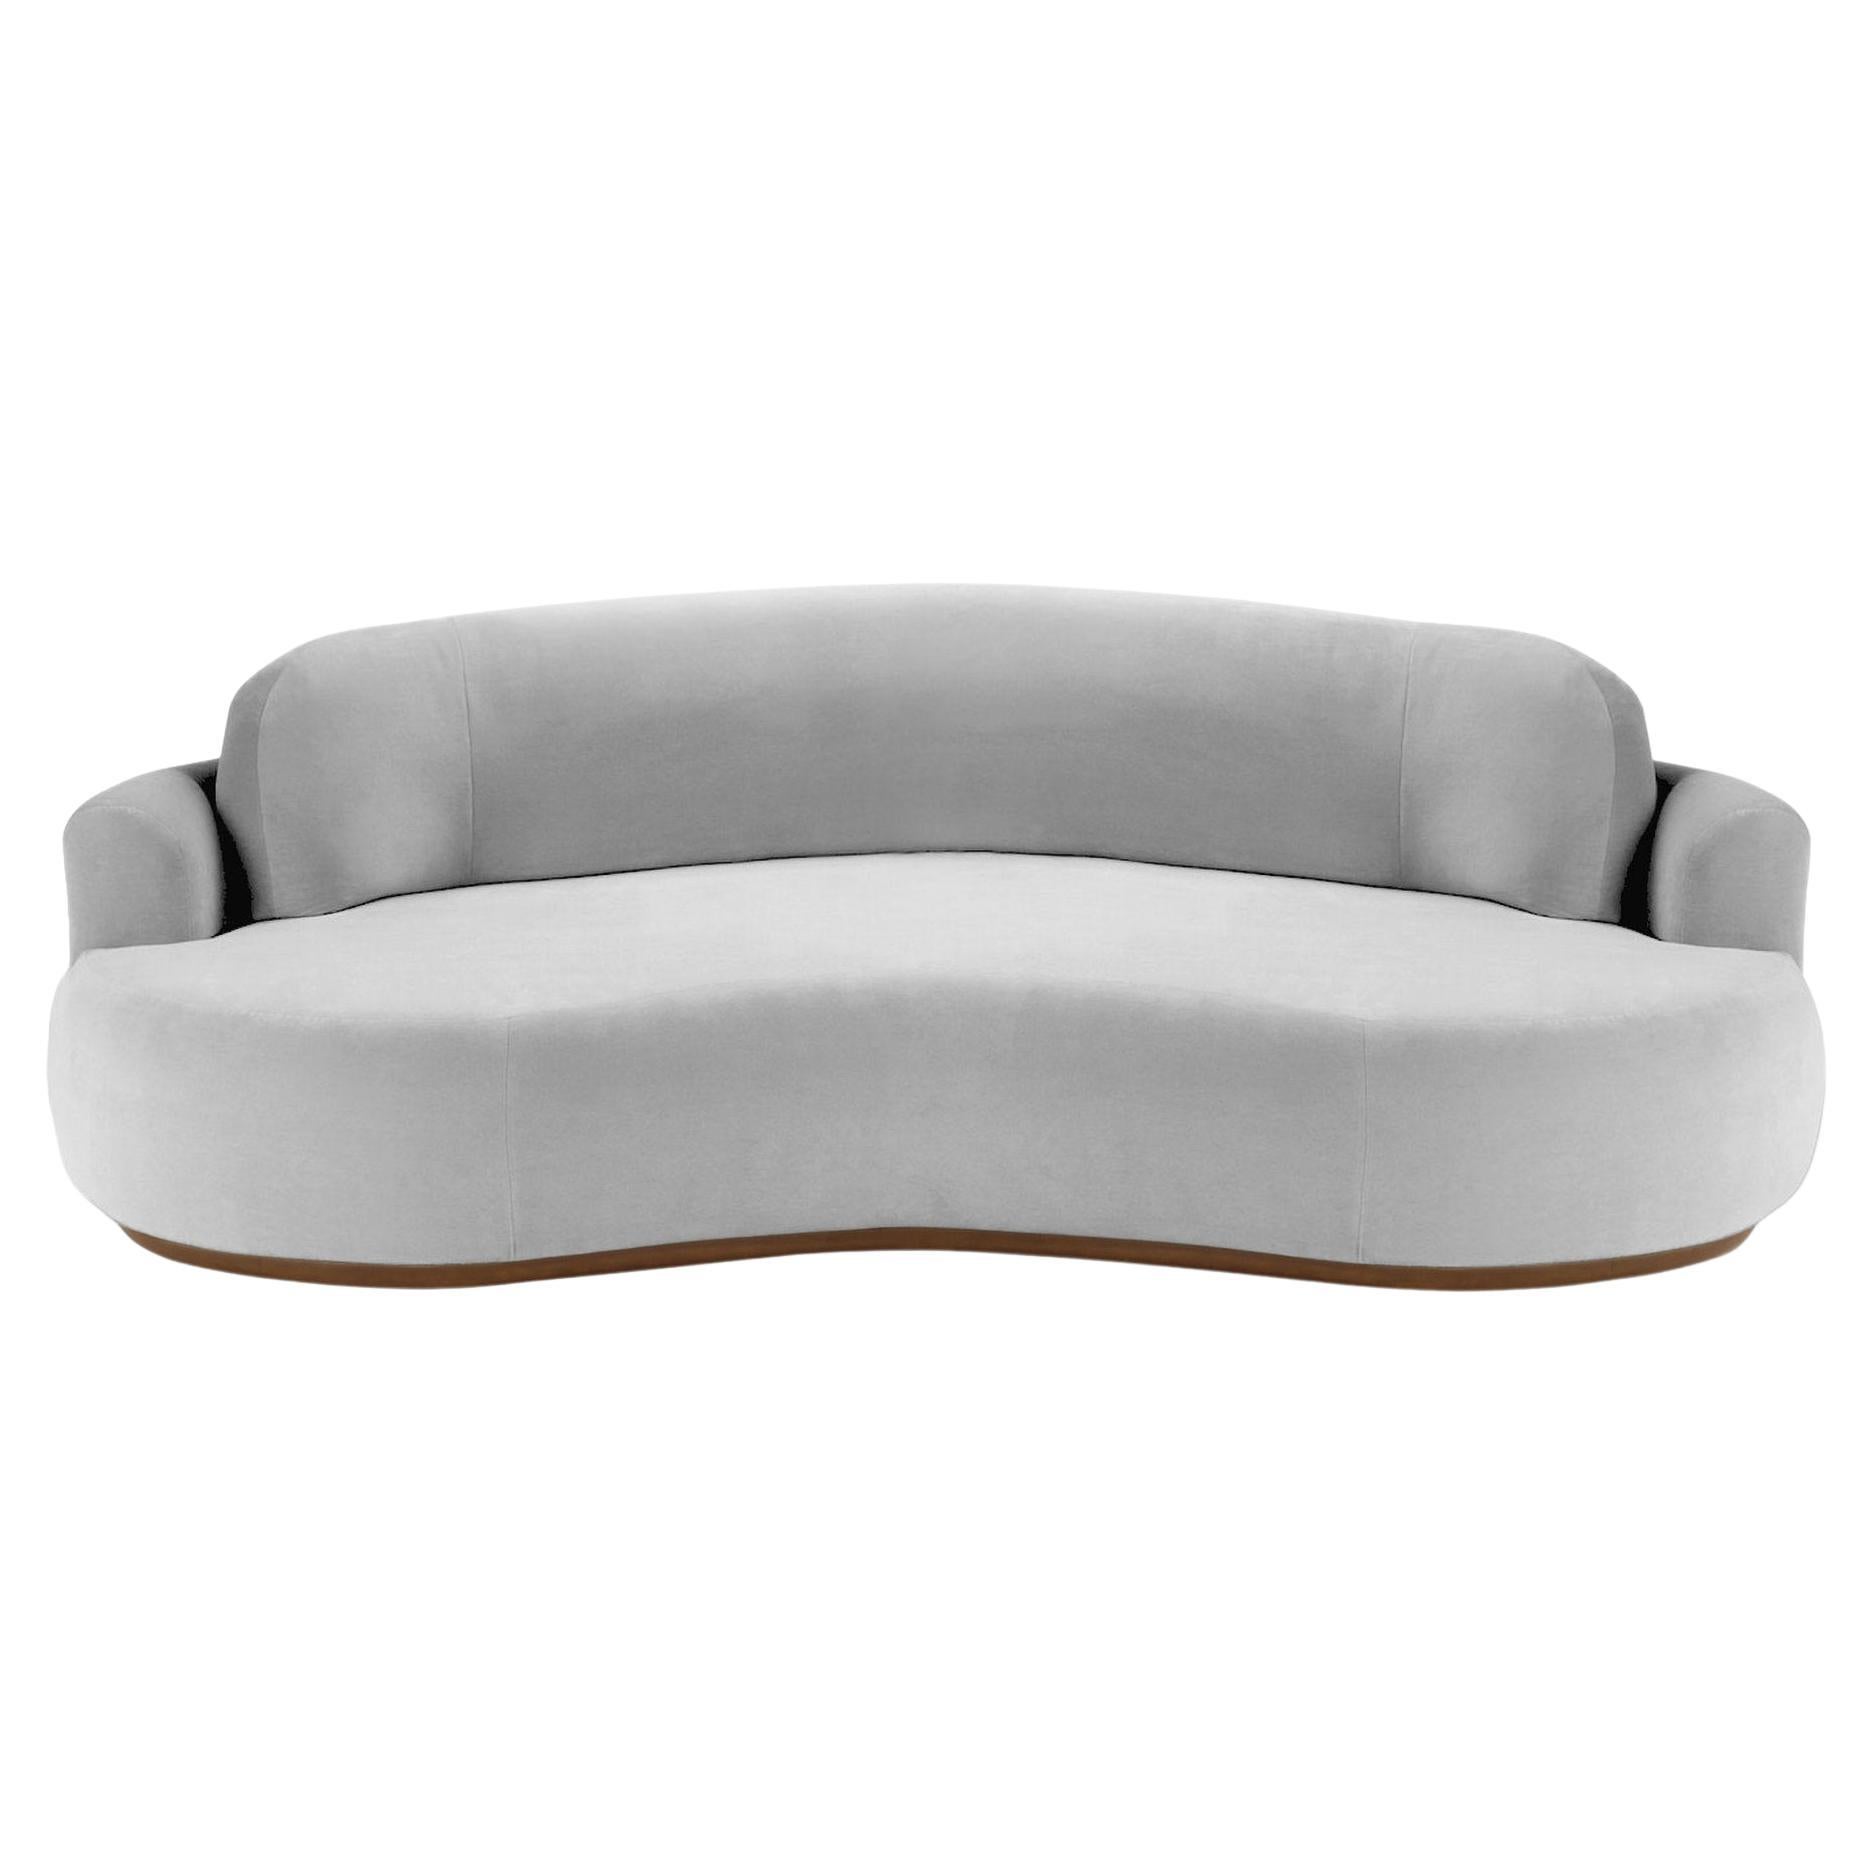 Naked Round Sofa, Medium with Beech Ash-056-1 and Aluminum For Sale